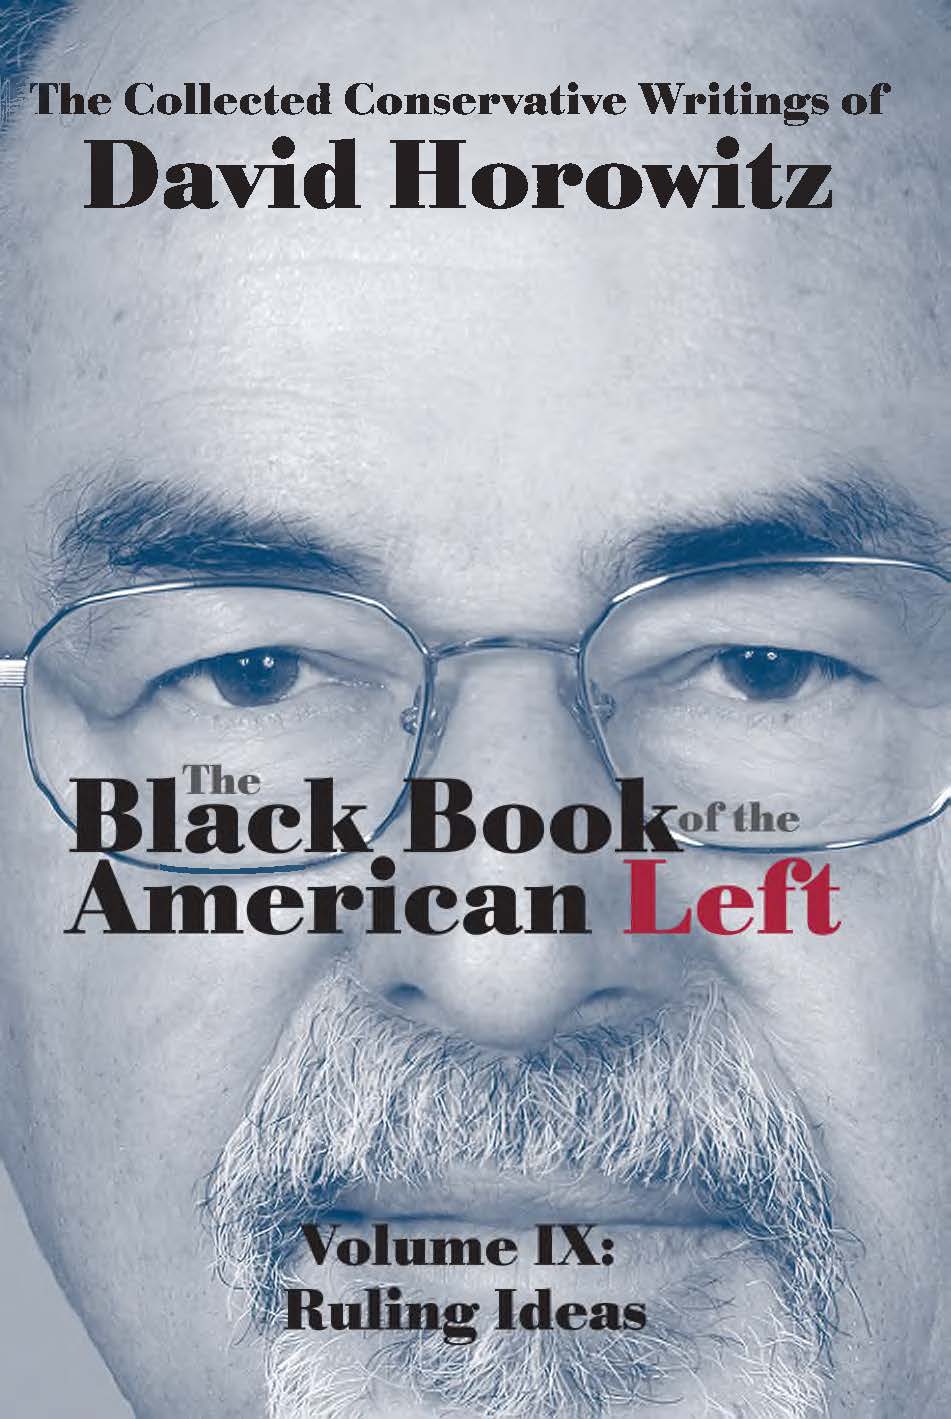 The Black Book of the American Left, Volume IX: Ruling Ideas